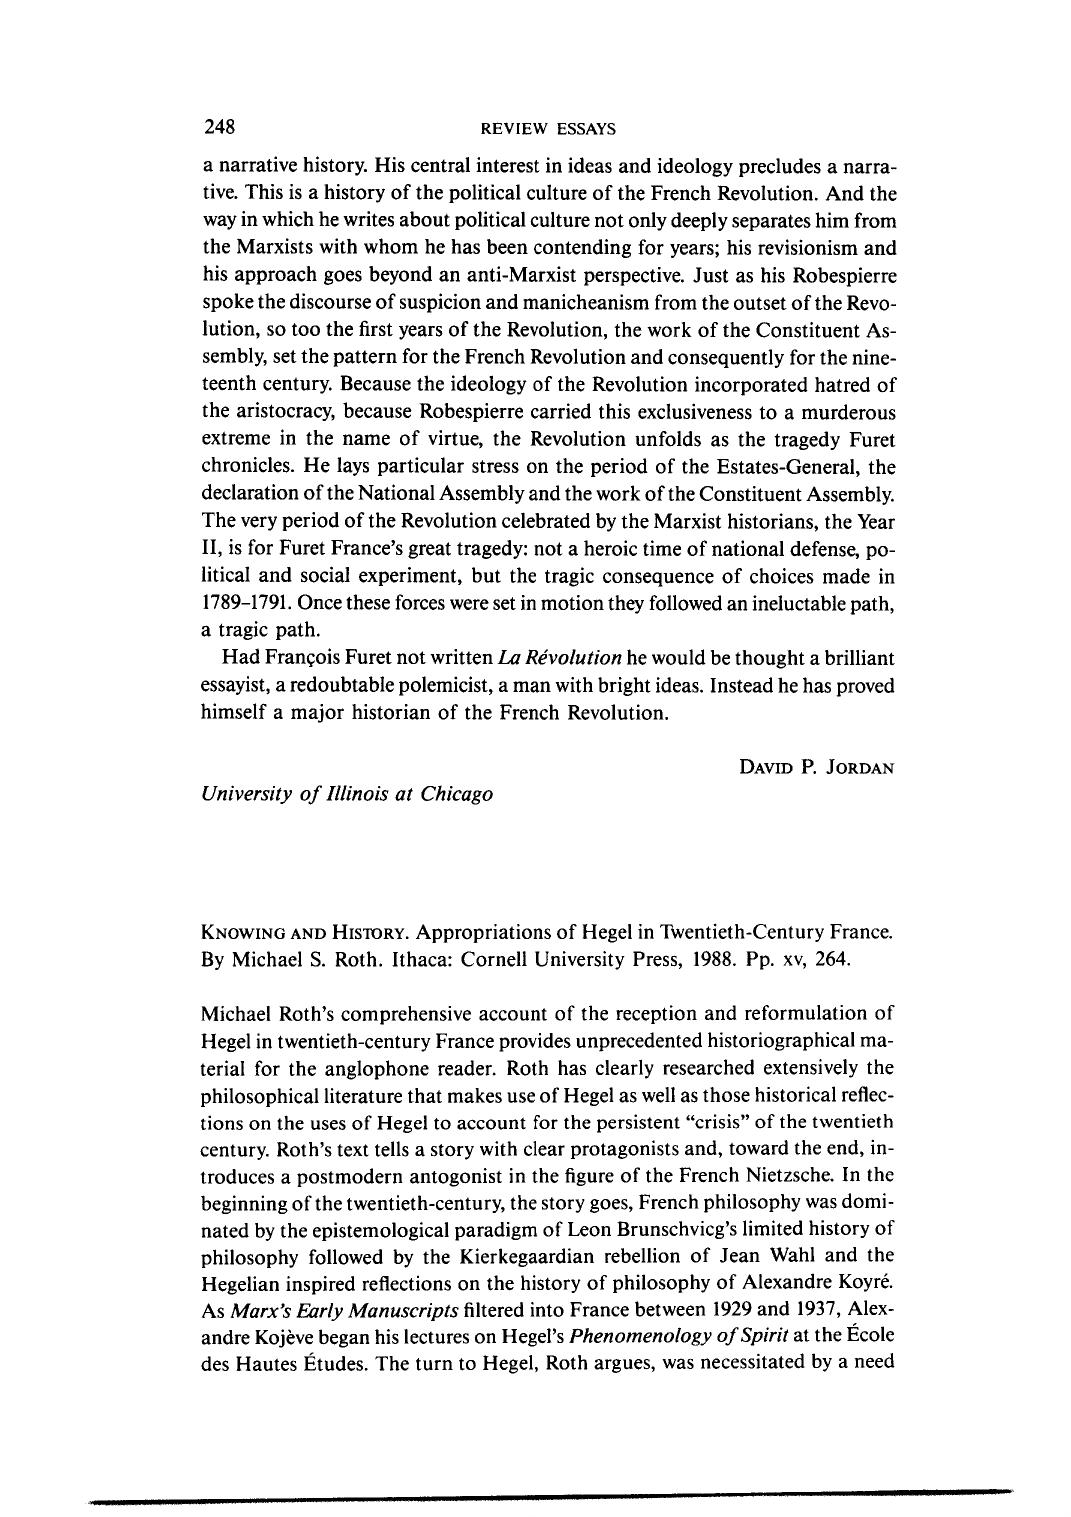 Knowing and History - Appropriations of Hegel in Twentieth-Century France - Article